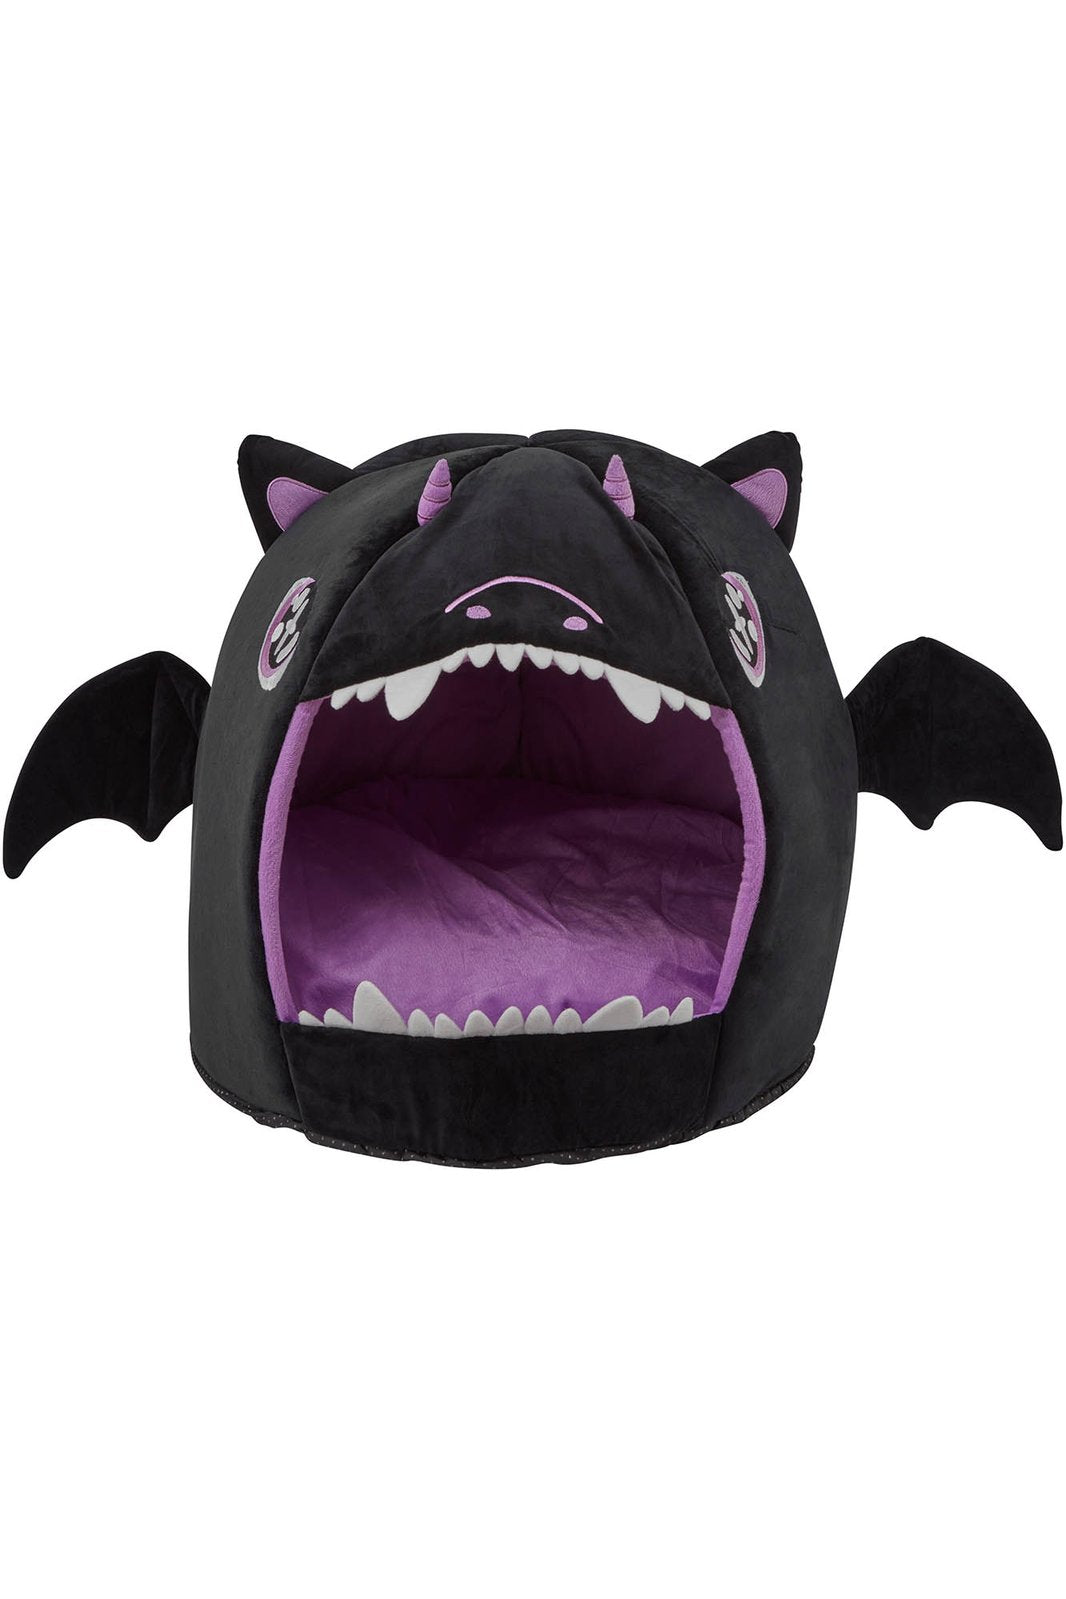 Dragon Baby Pet-Cave Bed